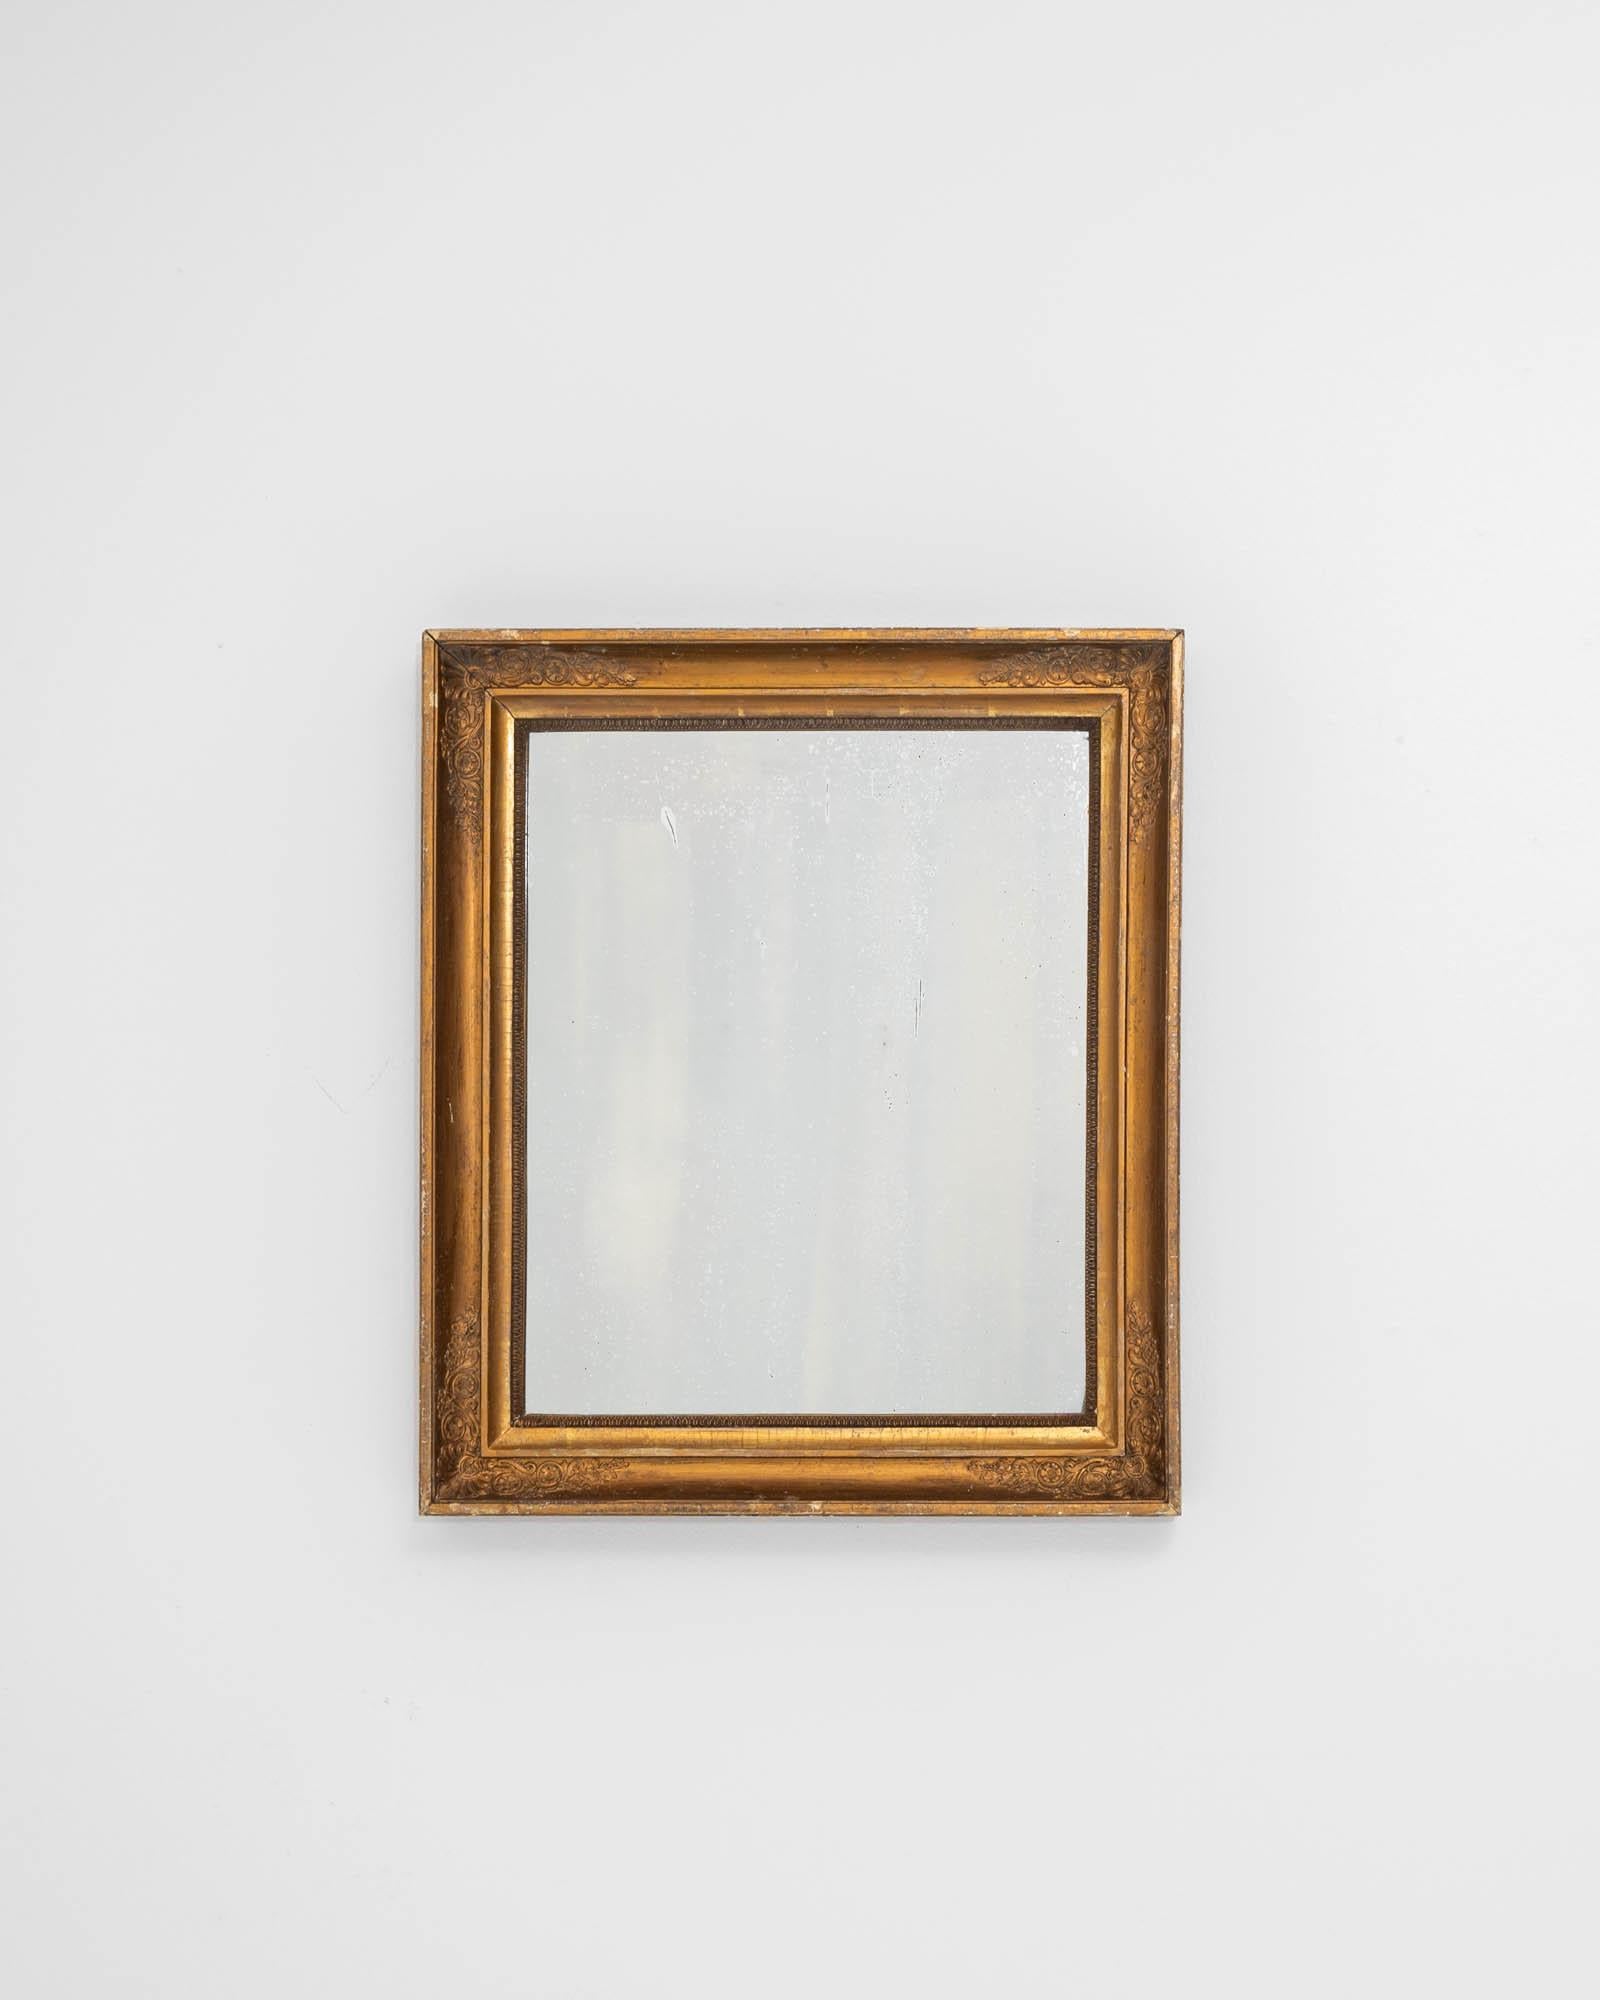 A wooden mirror created in 19th century France. Dazzlingly bright and full of a charming age and experience, this elegant mirror shimmers with class and beauty. From each of the frame’s corners, scrolled floral motifs bloom with surprising grace and